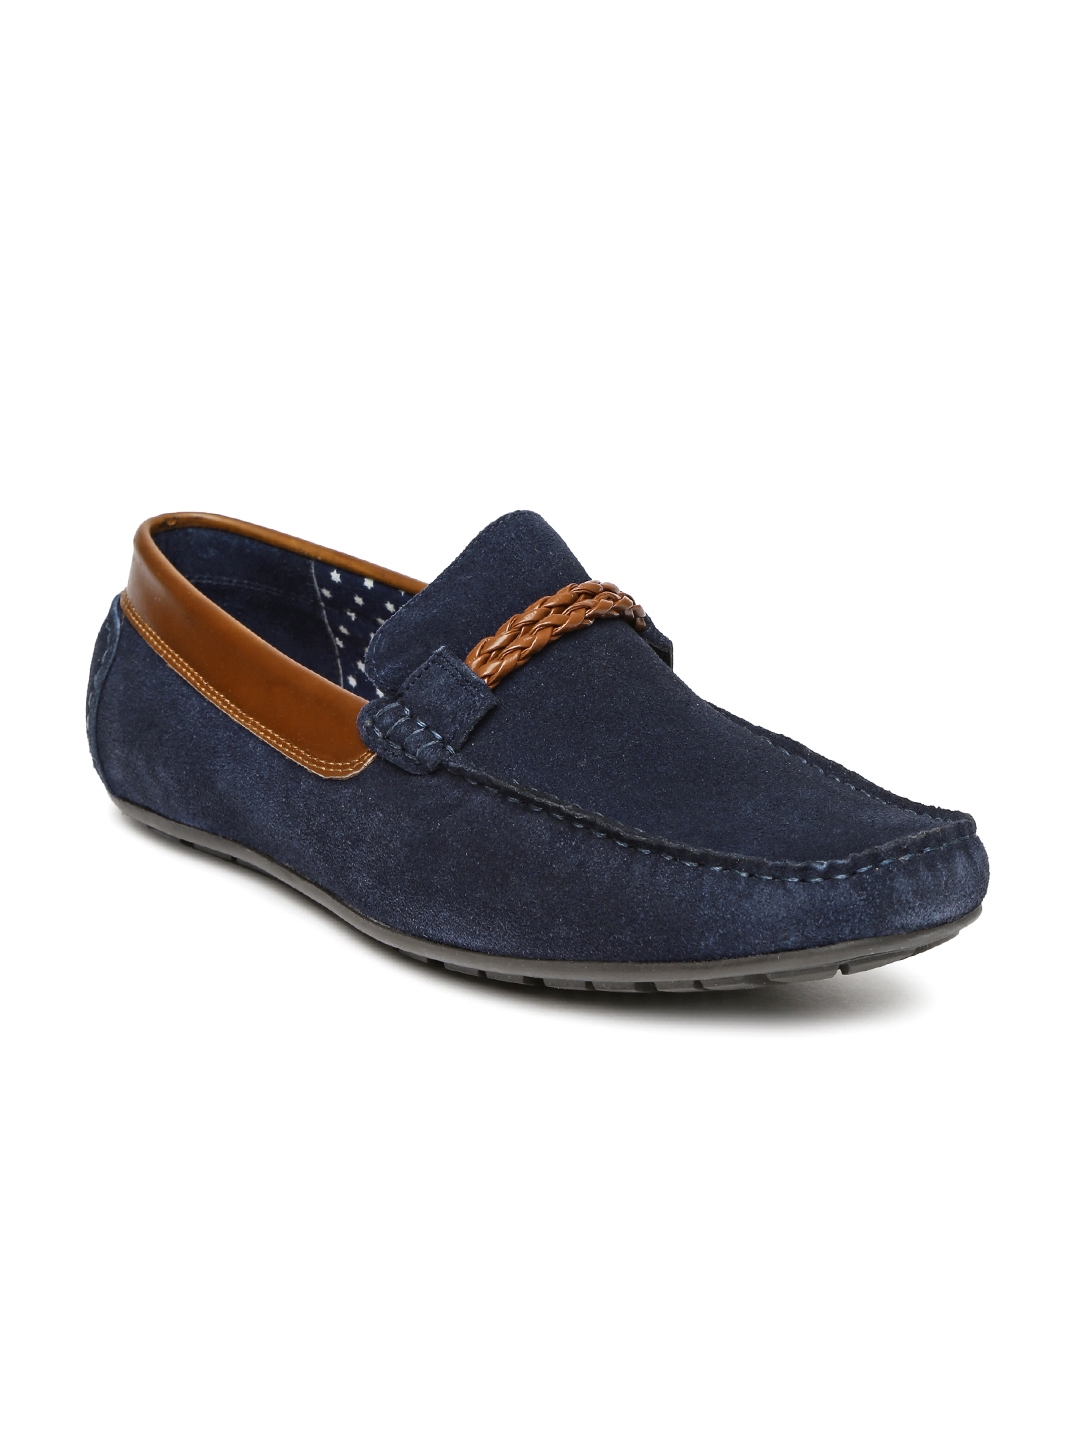 Buy Footin Men Navy Suede Loafers - Casual Shoes for Men 1472586 | Myntra